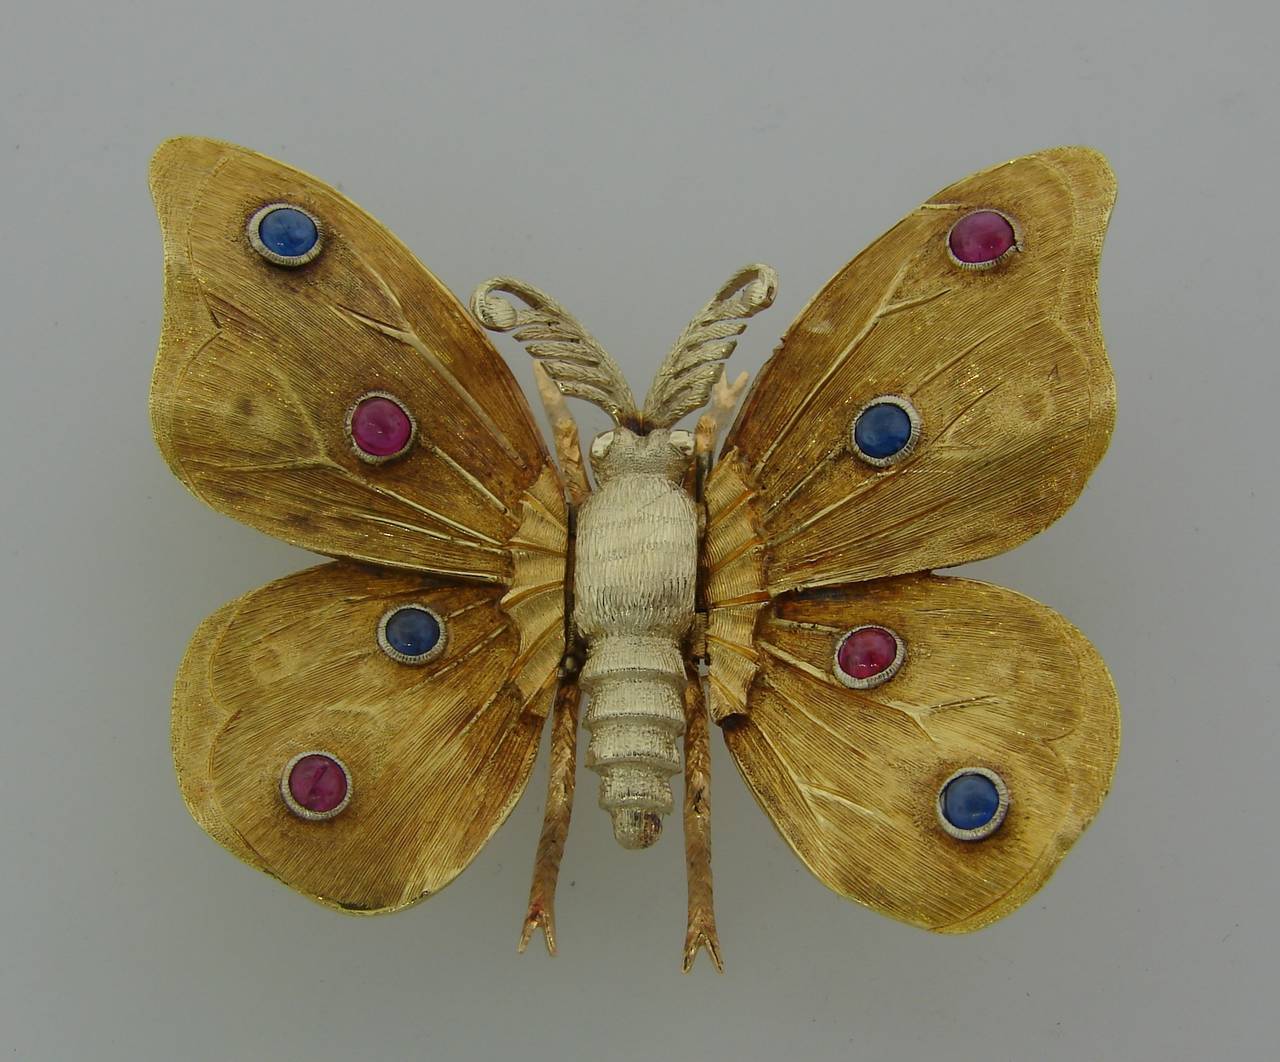 Stunning butterfly brooch created by Mario Buccellati in Italy in the 1950s. Perfect proportions, volume and signature Buccellati satin finish on gold are the highlights of the piece. 
The brooch measures 1-3/4